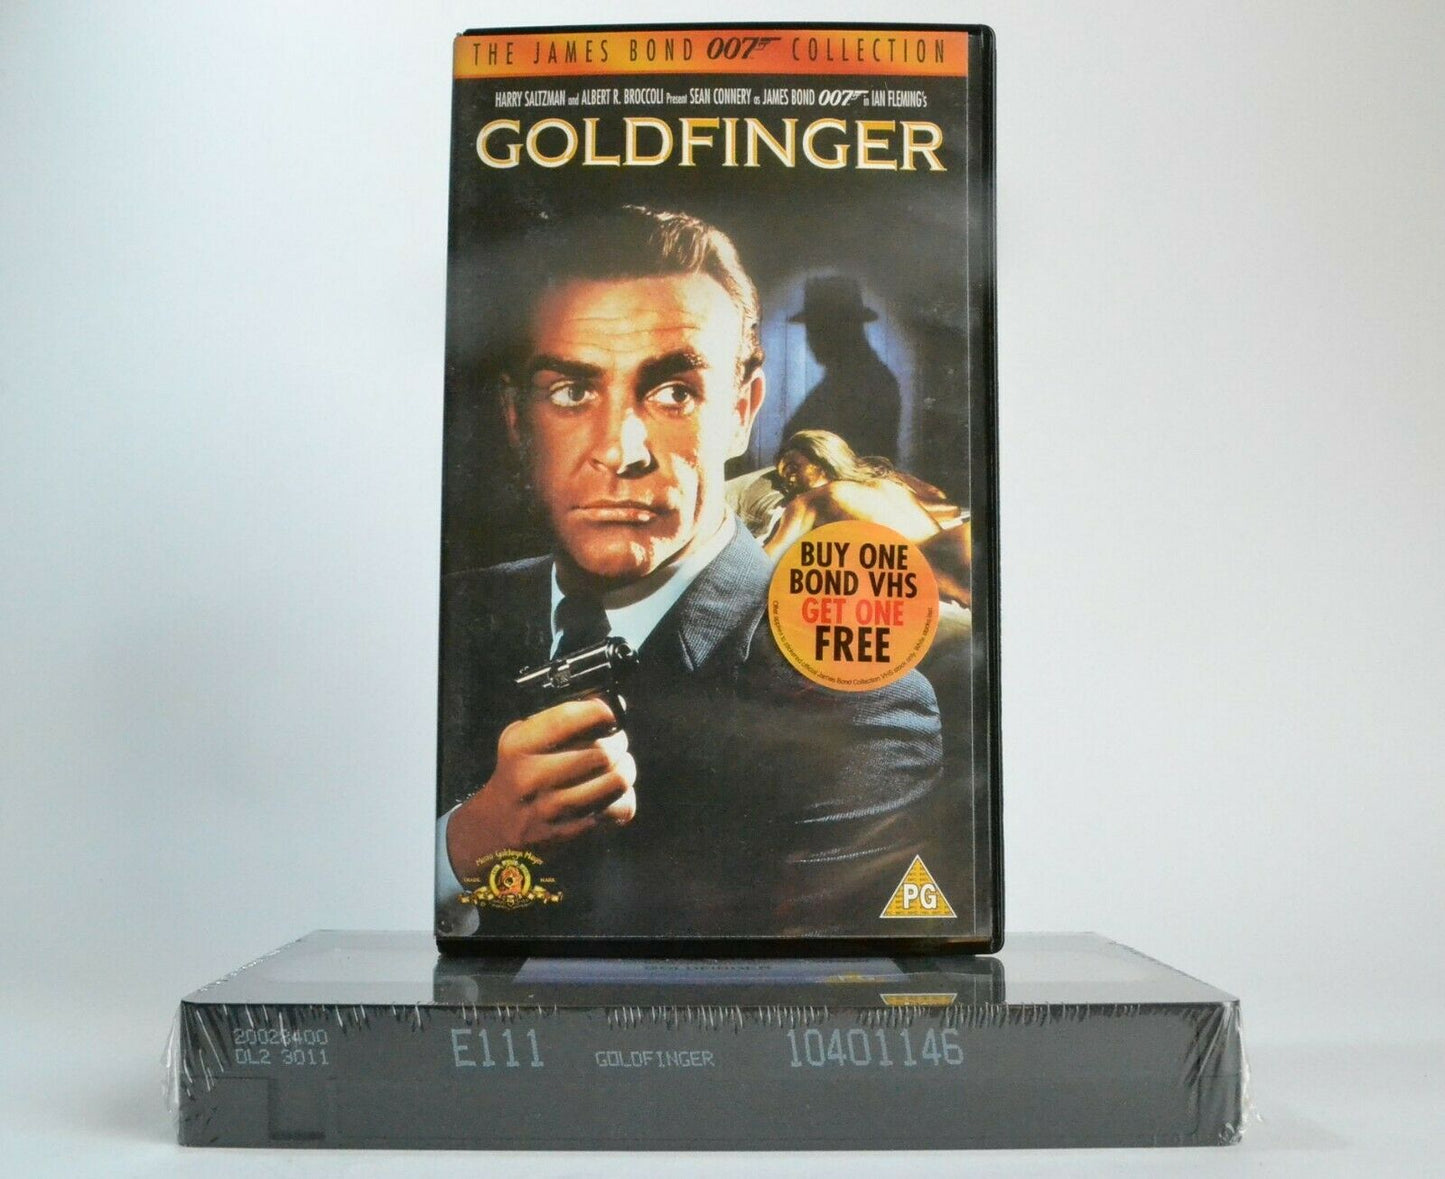 Goldfinger (1964): James Bond Collection - Brand New Sealed - Sean Connery - VHS-